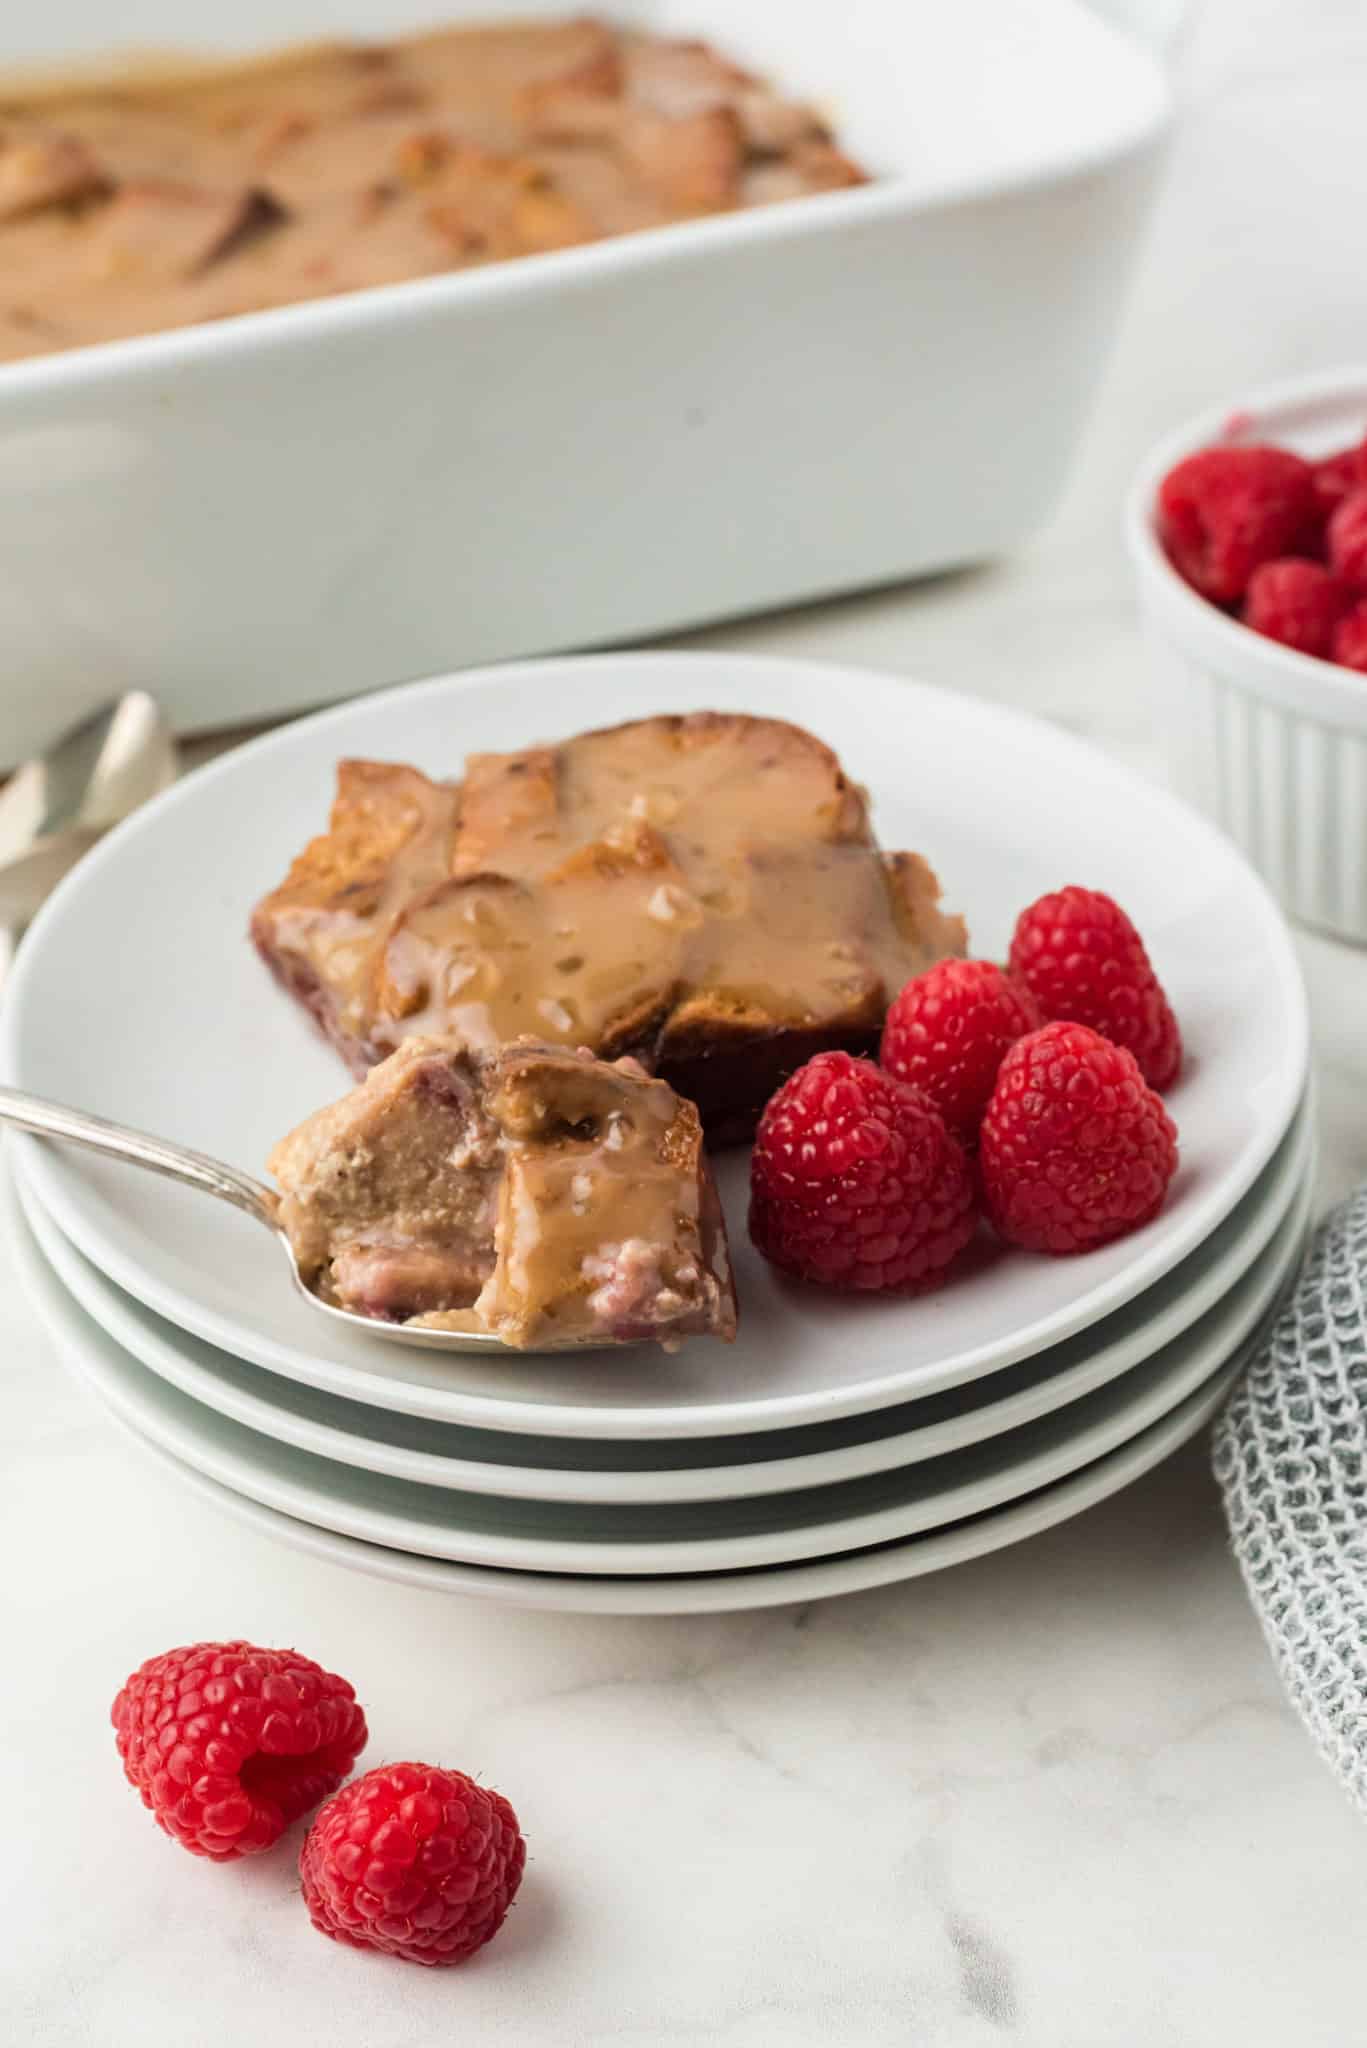 bread pudding served on a white plate with raspberries.